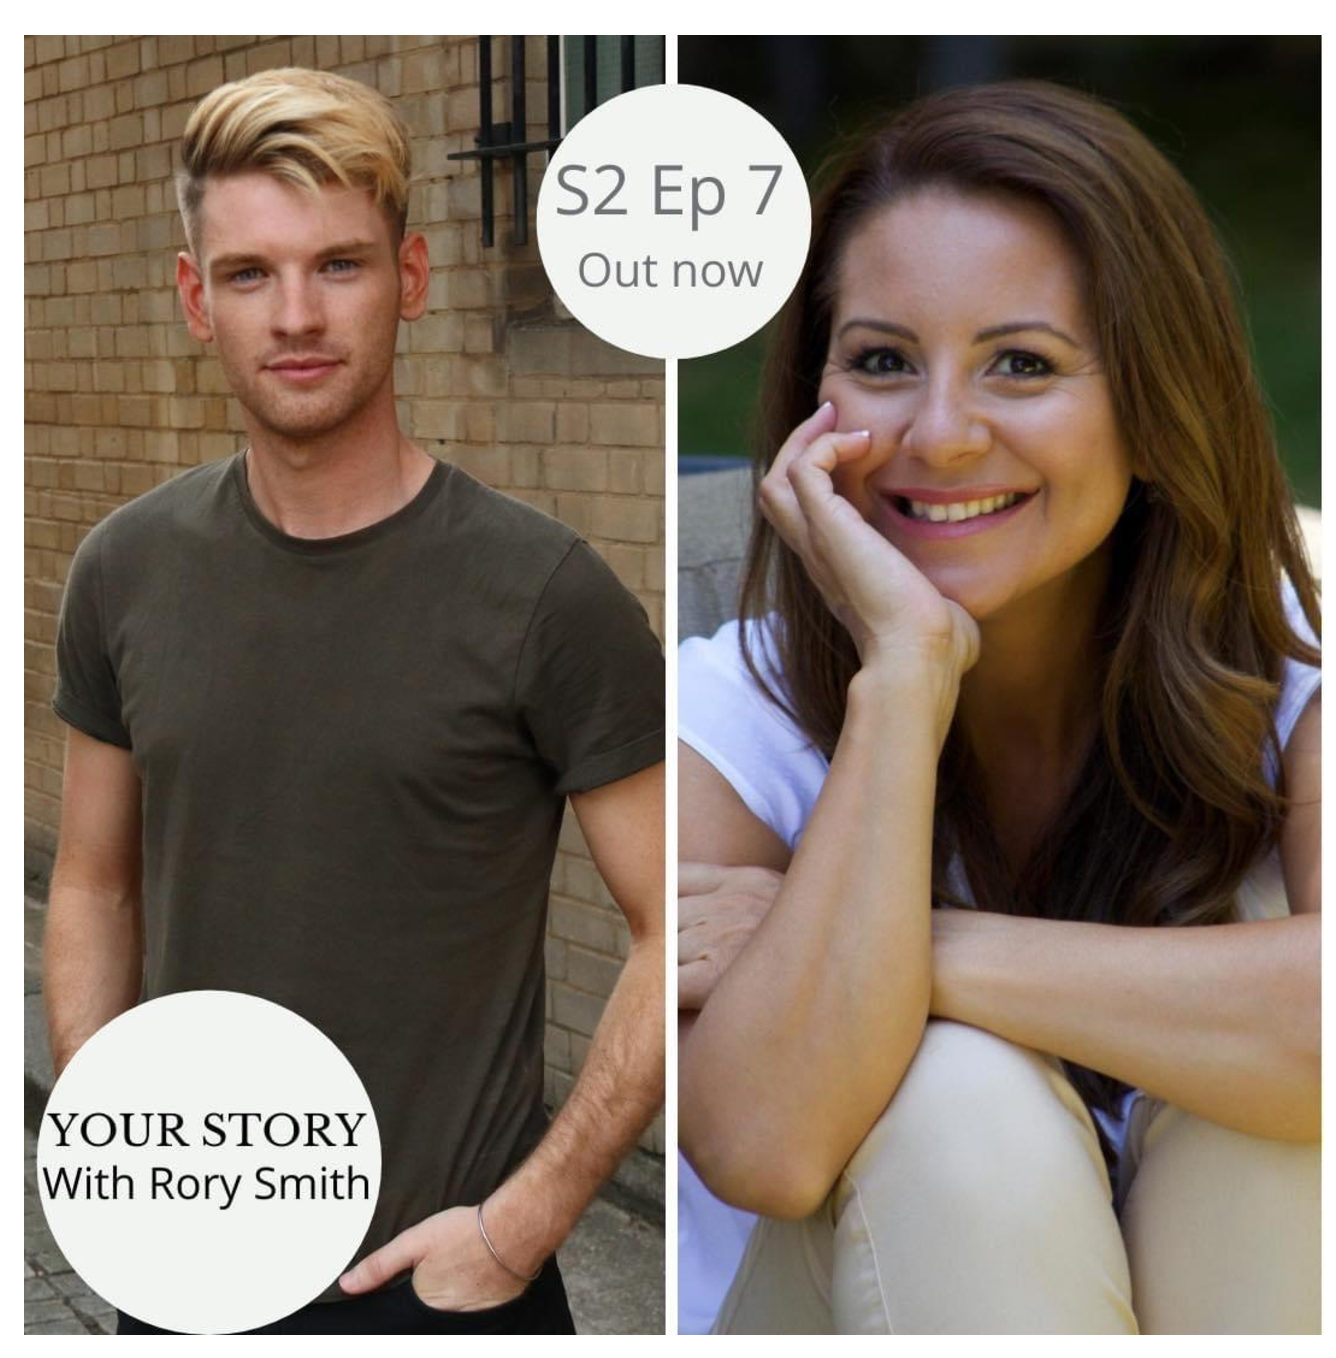 Your Story With Rory Smith